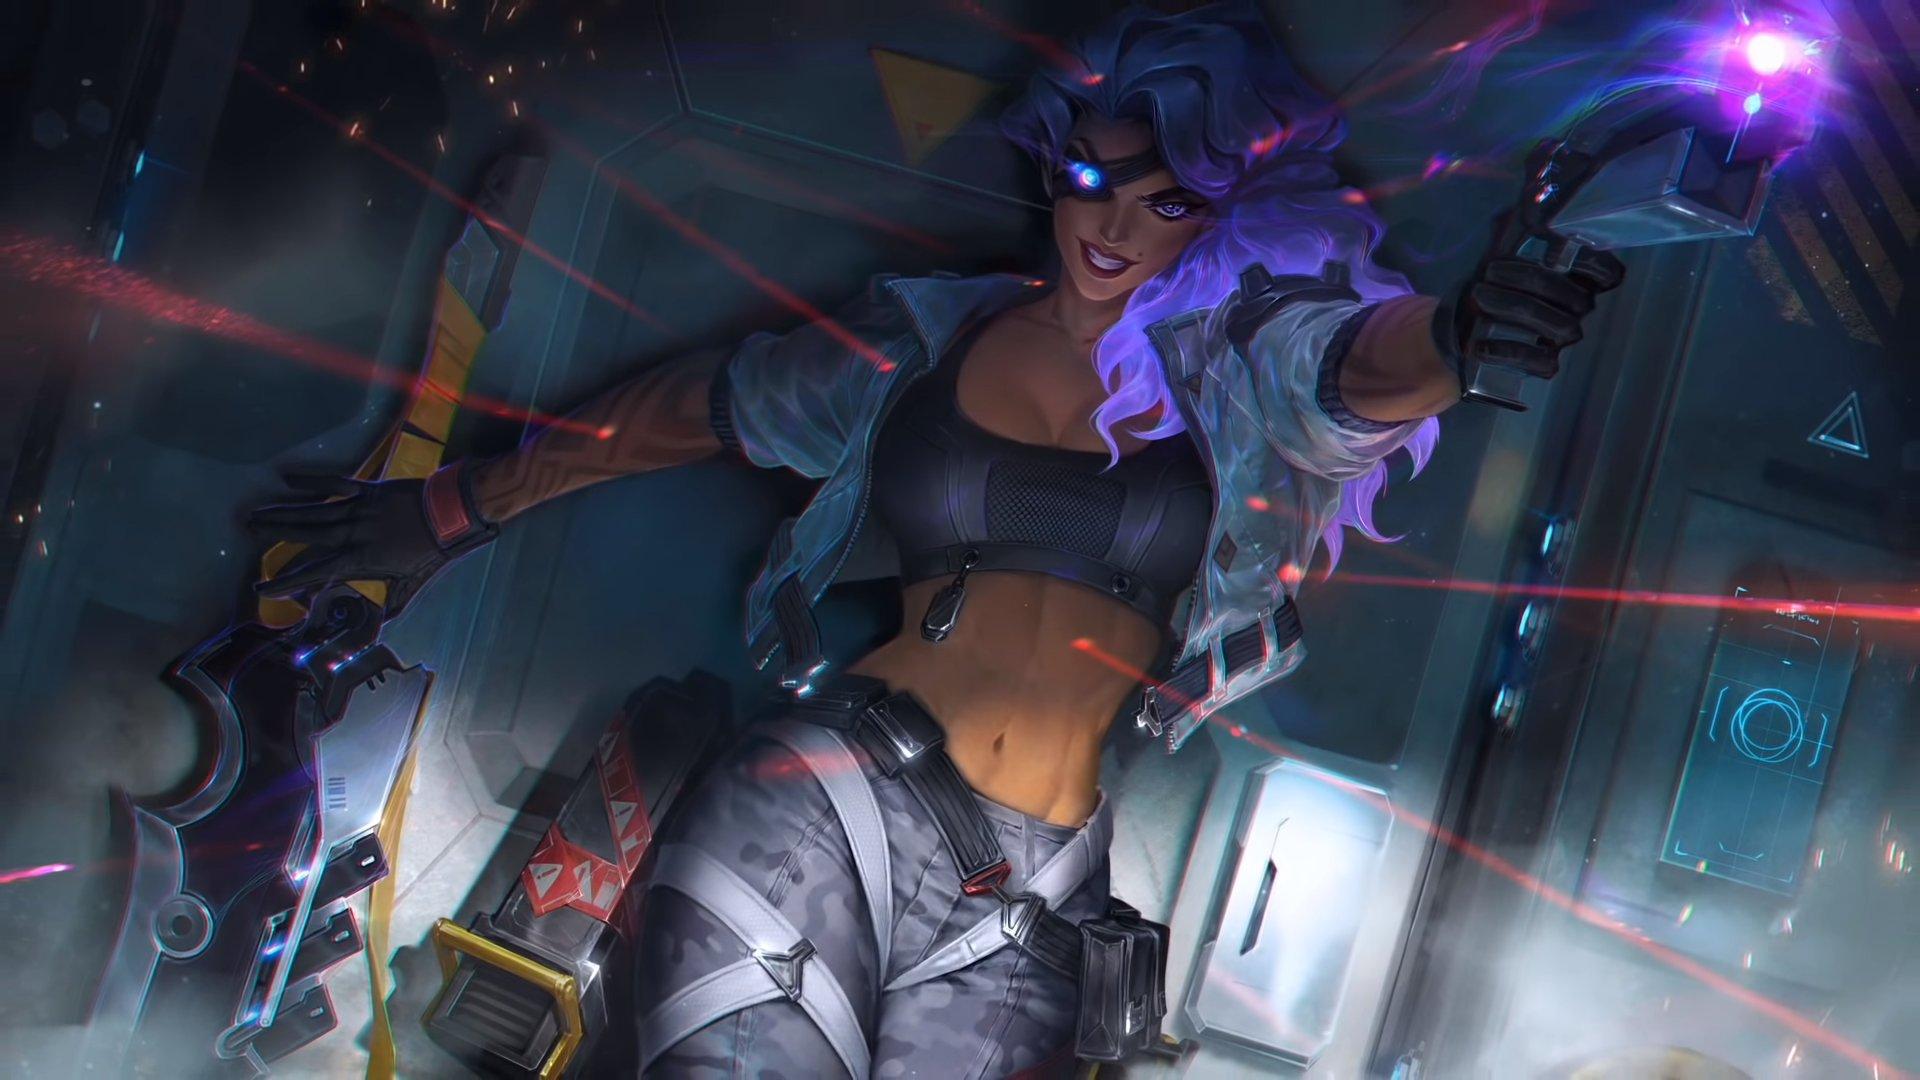 Samira will likely be released in LoL Patch 10.18, and get a PsyOps skin on release.